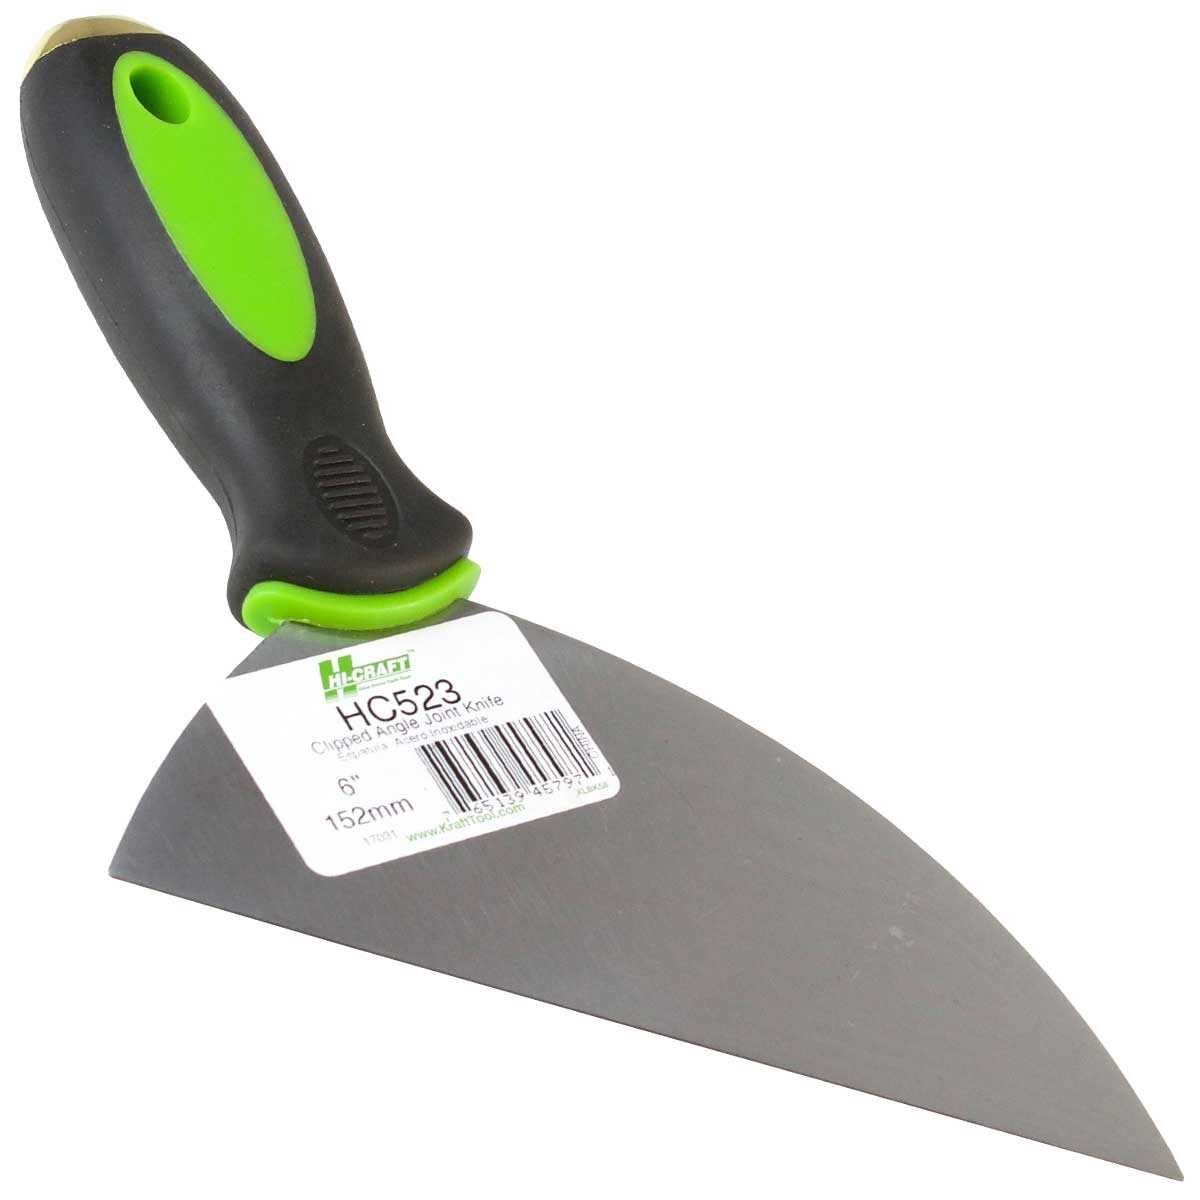 Kraft 6" Clipped Joint Knife